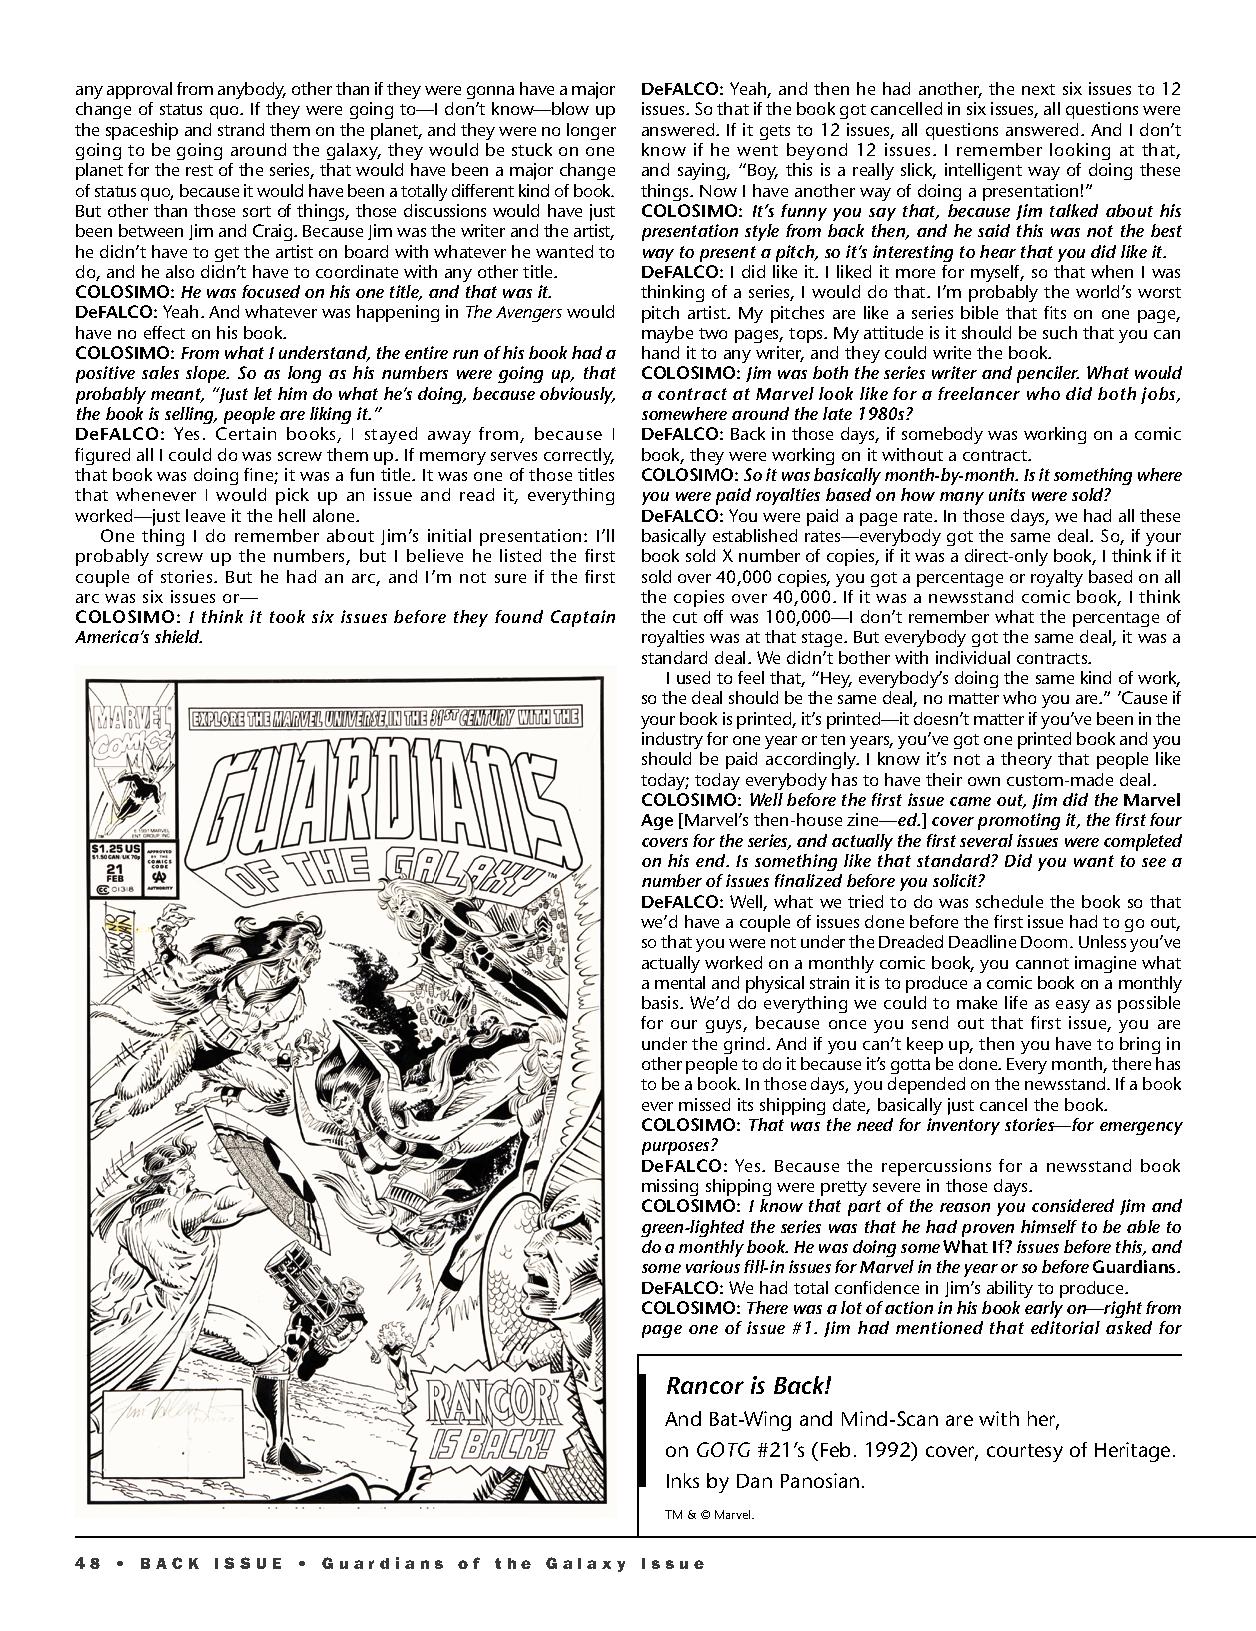 Read online Back Issue comic -  Issue #119 - 50